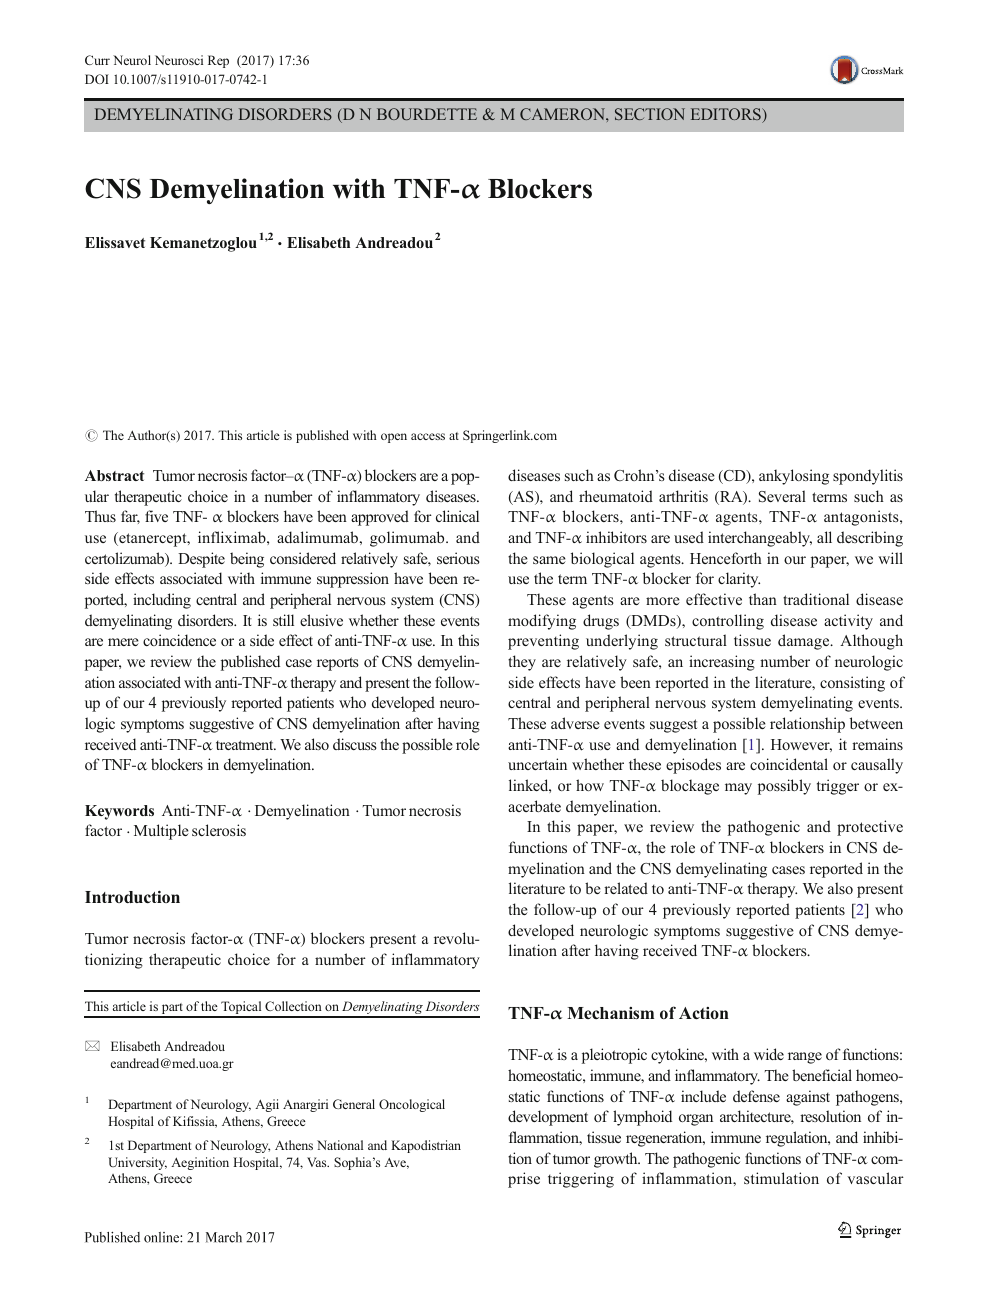 Cns Demyelination With Tnf A Blockers Topic Of Research Paper In Clinical Medicine Download Scholarly Article Pdf And Read For Free On Cyberleninka Open Science Hub